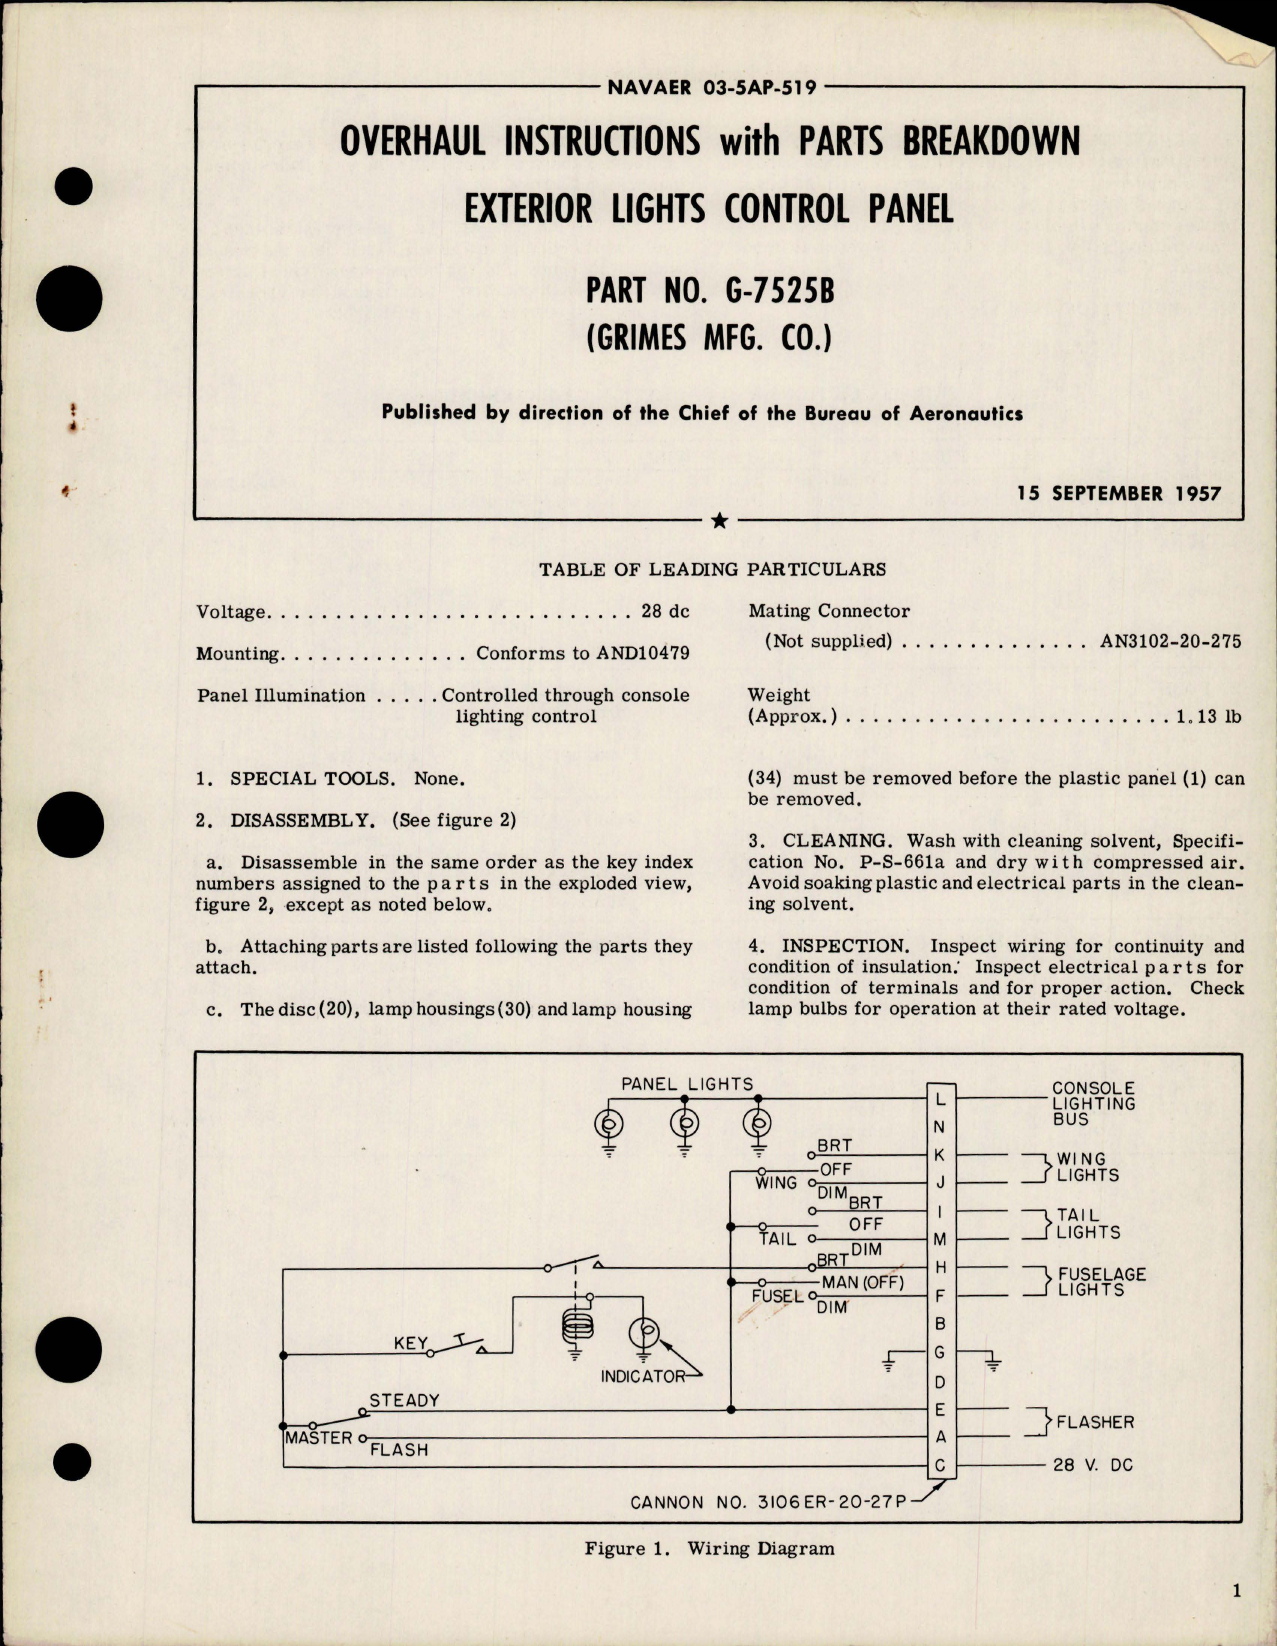 Sample page 1 from AirCorps Library document: Overhaul Instructions with Parts Breakdown for Exterior Lights Control Panel - Part G-7525B 